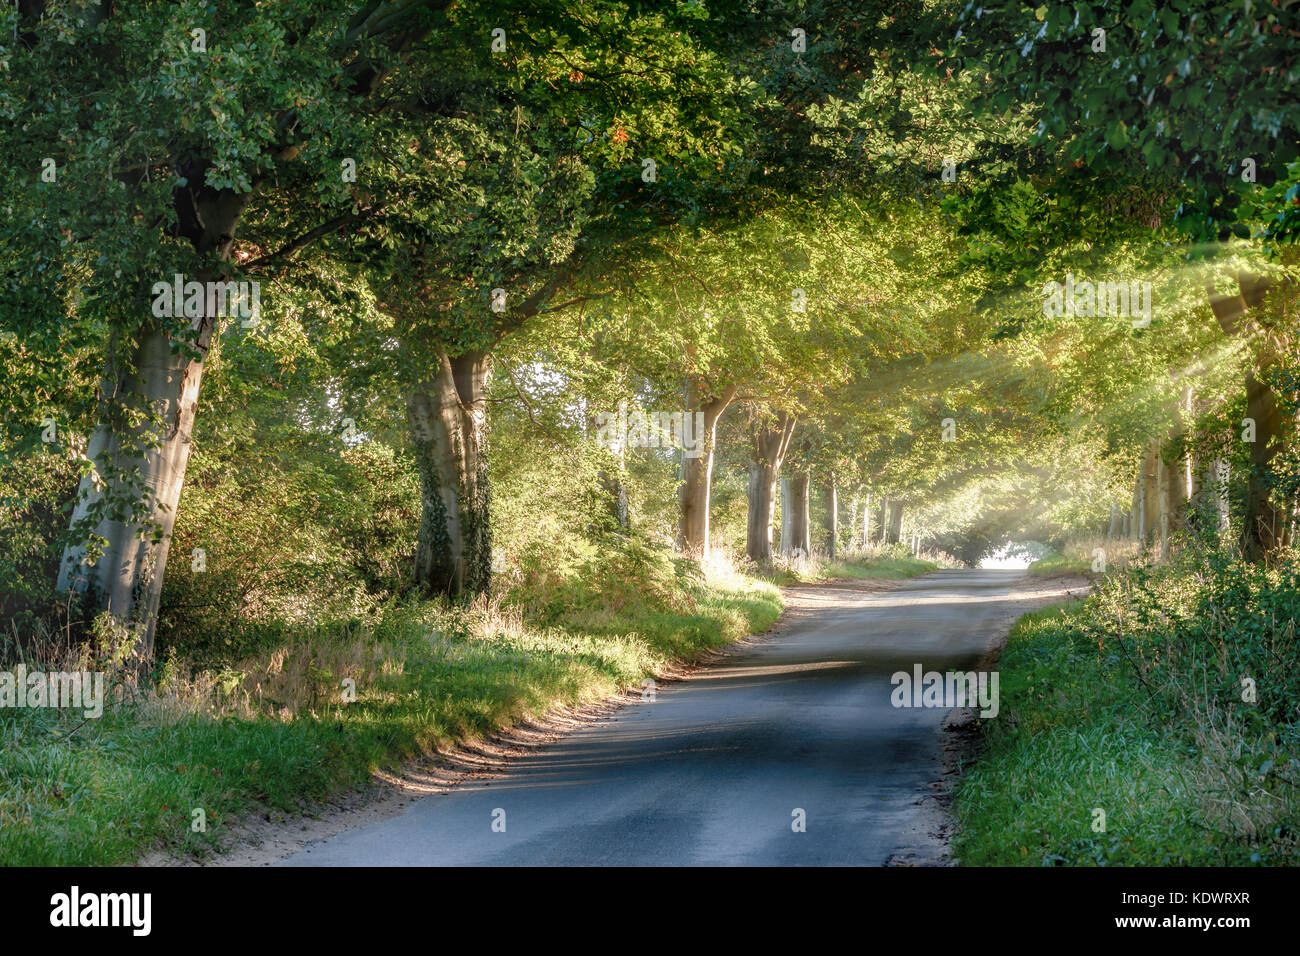 Quiet rural road at sunrise through a arch of mature trees. Golden sunlight pours under the summer canopies of green leaves. Tree trucks reflecting th Stock Photo